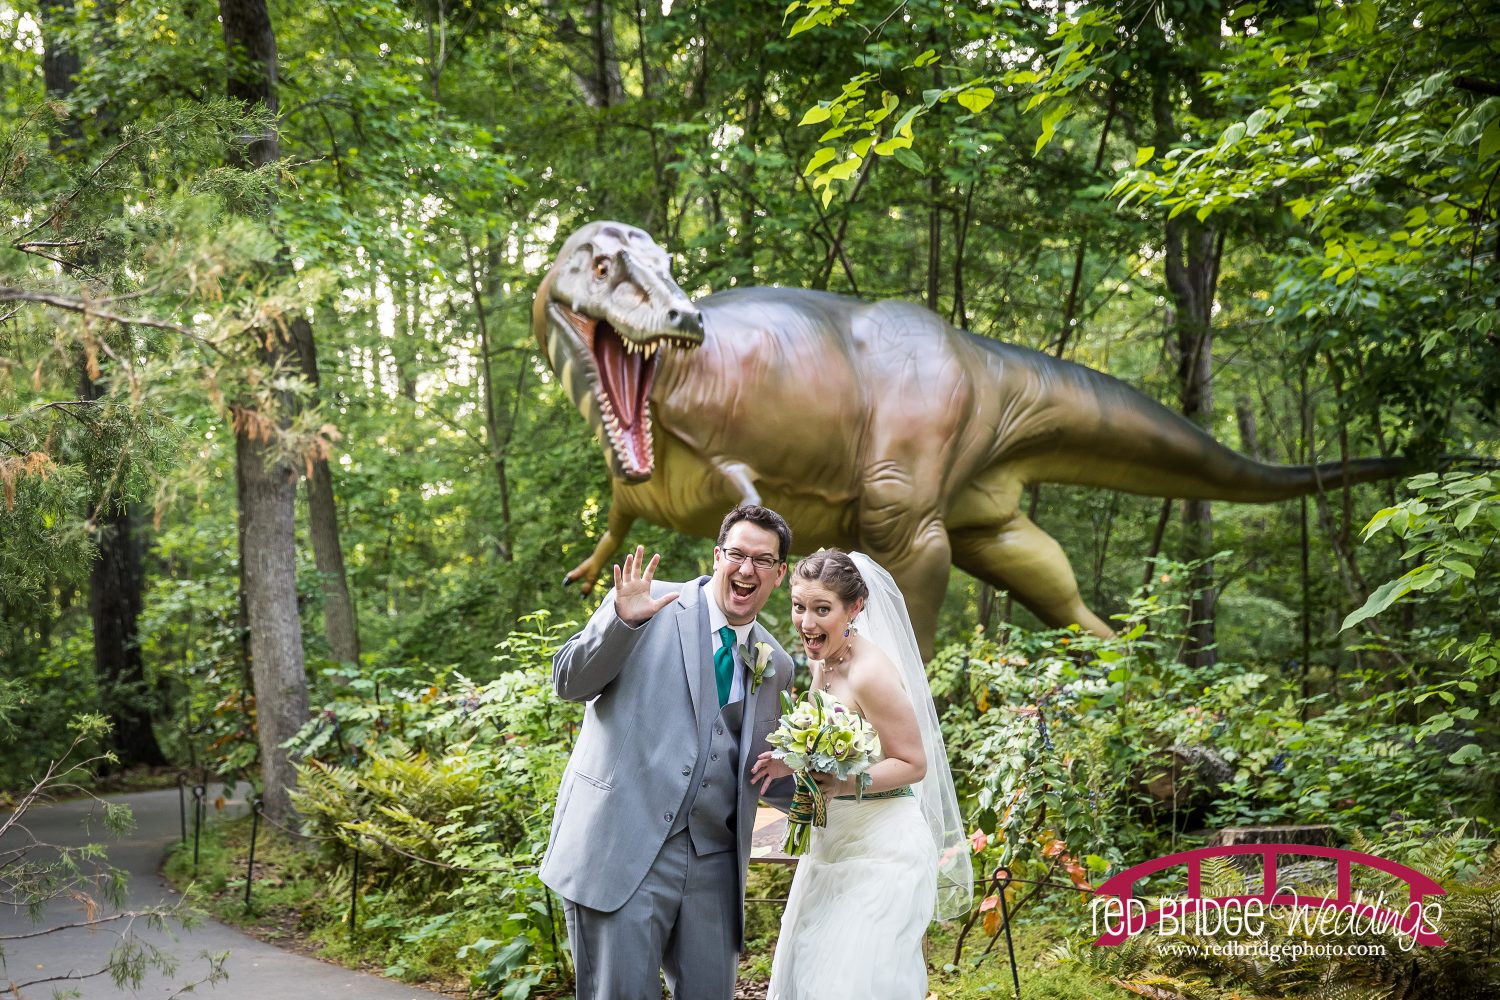 Red Bridge Photography - Vivian & Edward's Wedding at Museum of Life and Science - Dinosaurs!